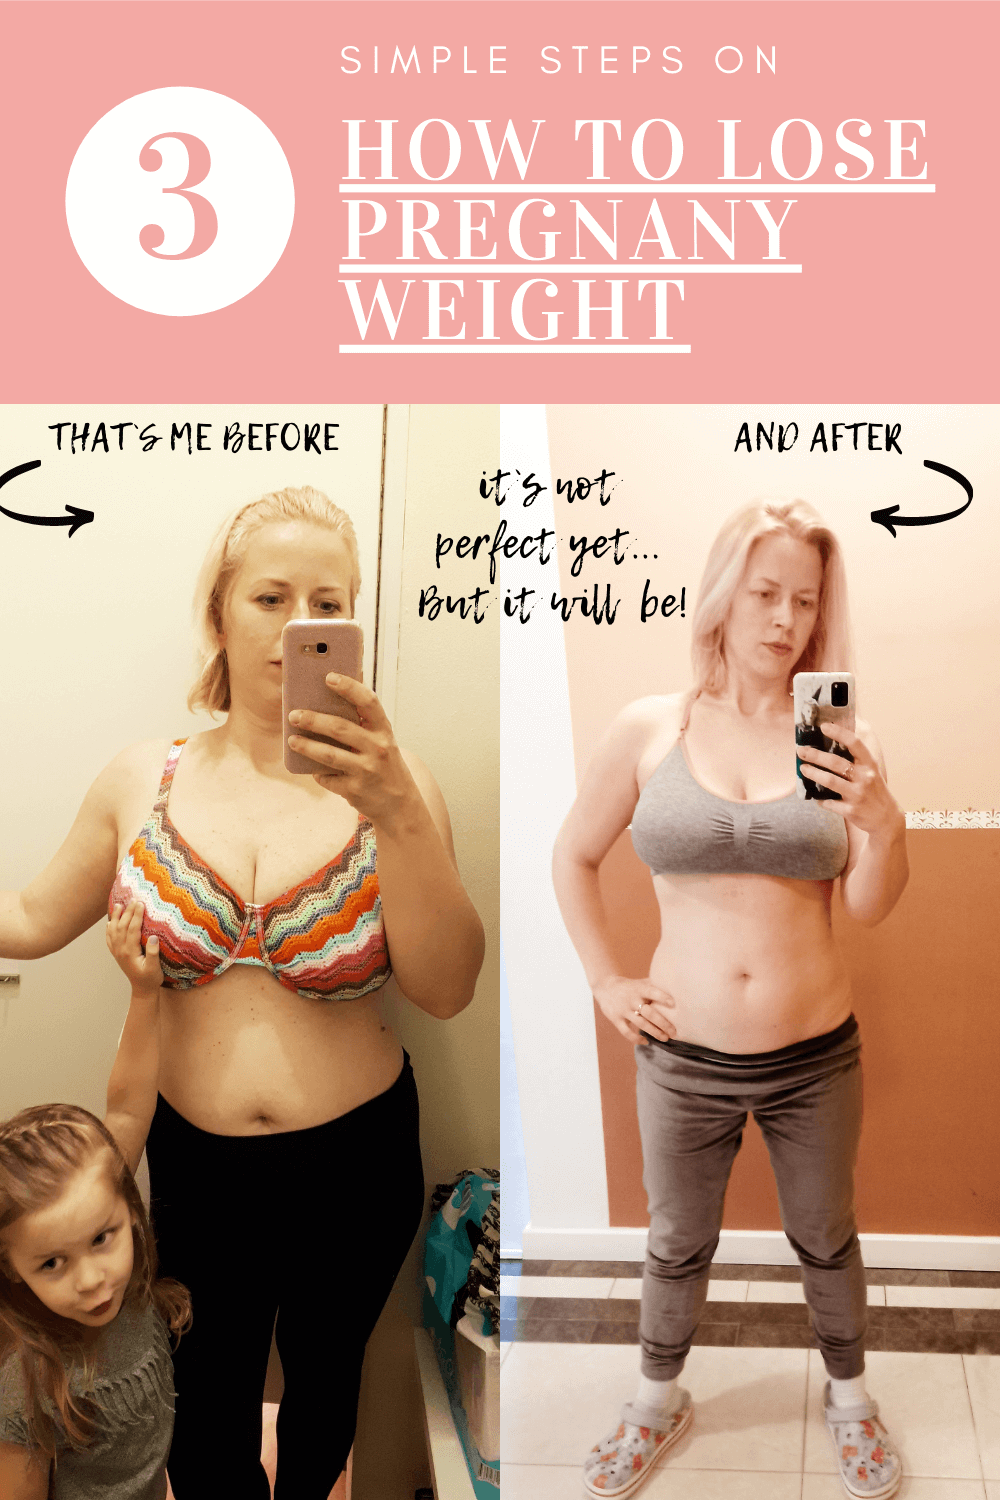 Losing 50 Lbs While Pregnant: The Ultimate Weight Loss Journey